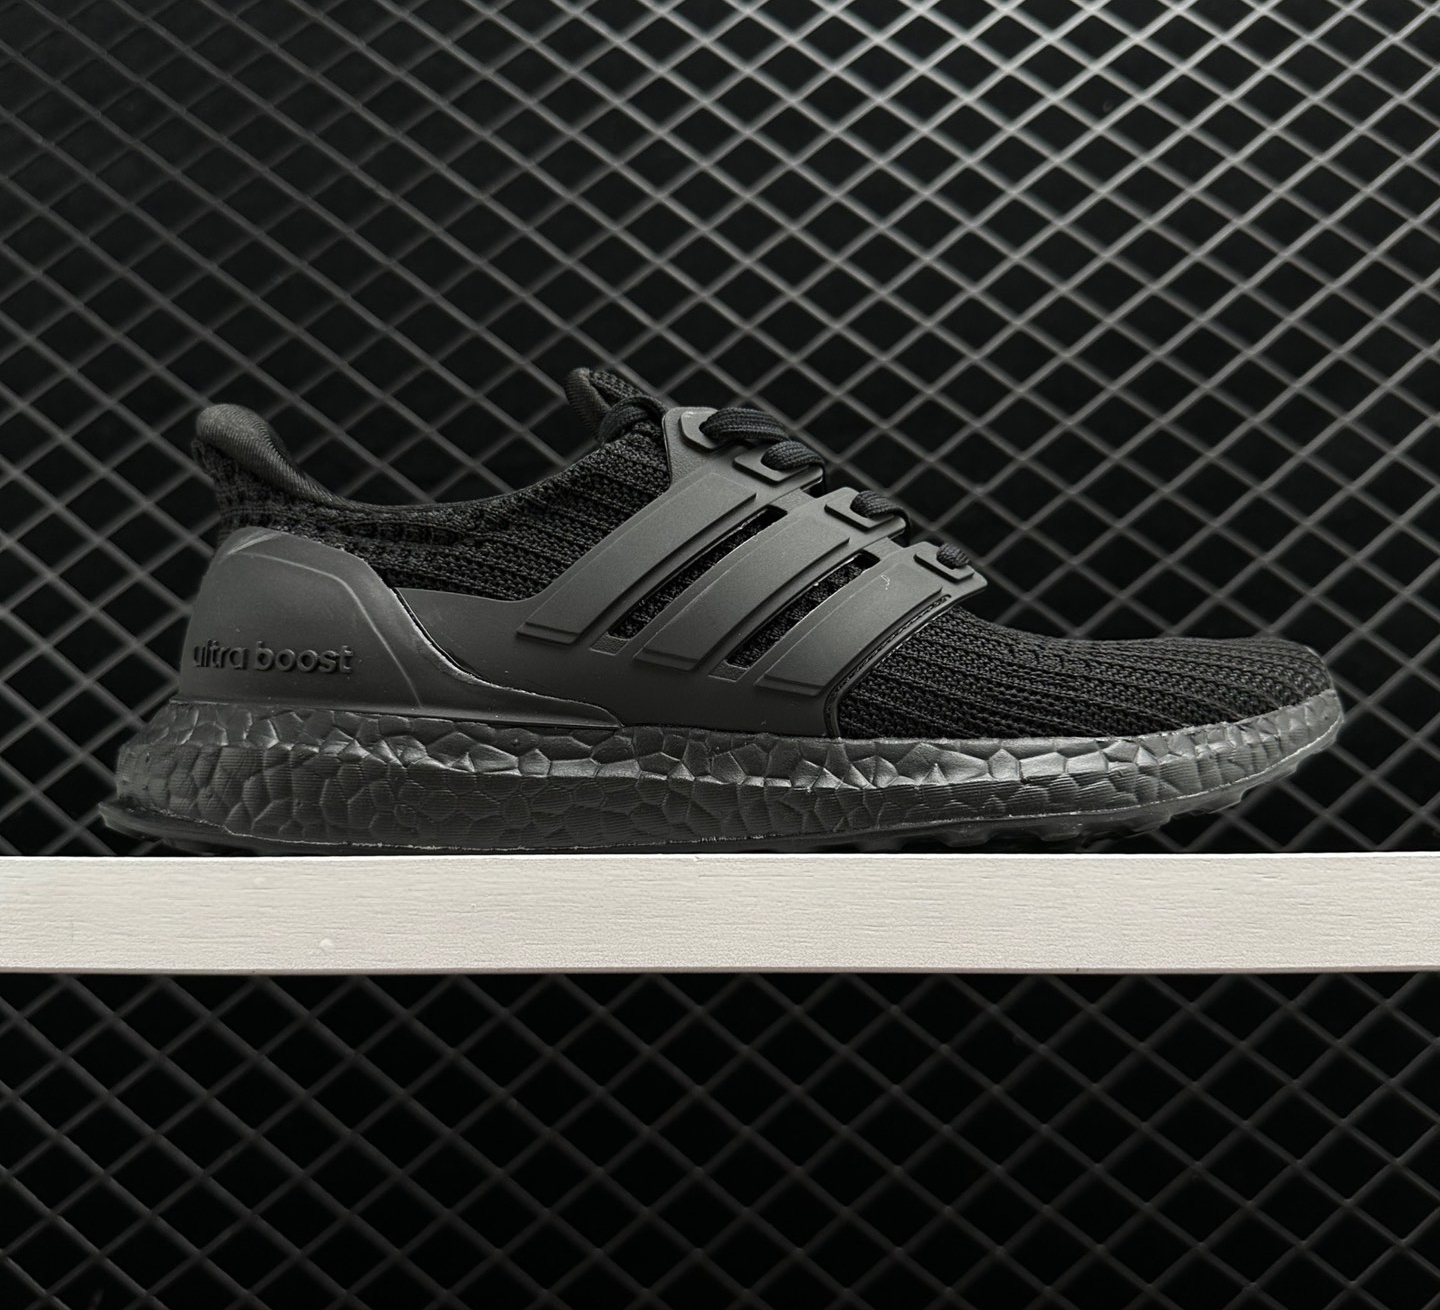 Adidas UltraBoost 3.0 Limited Triple Black CG3038 - Limited Edition Boost Sneakers